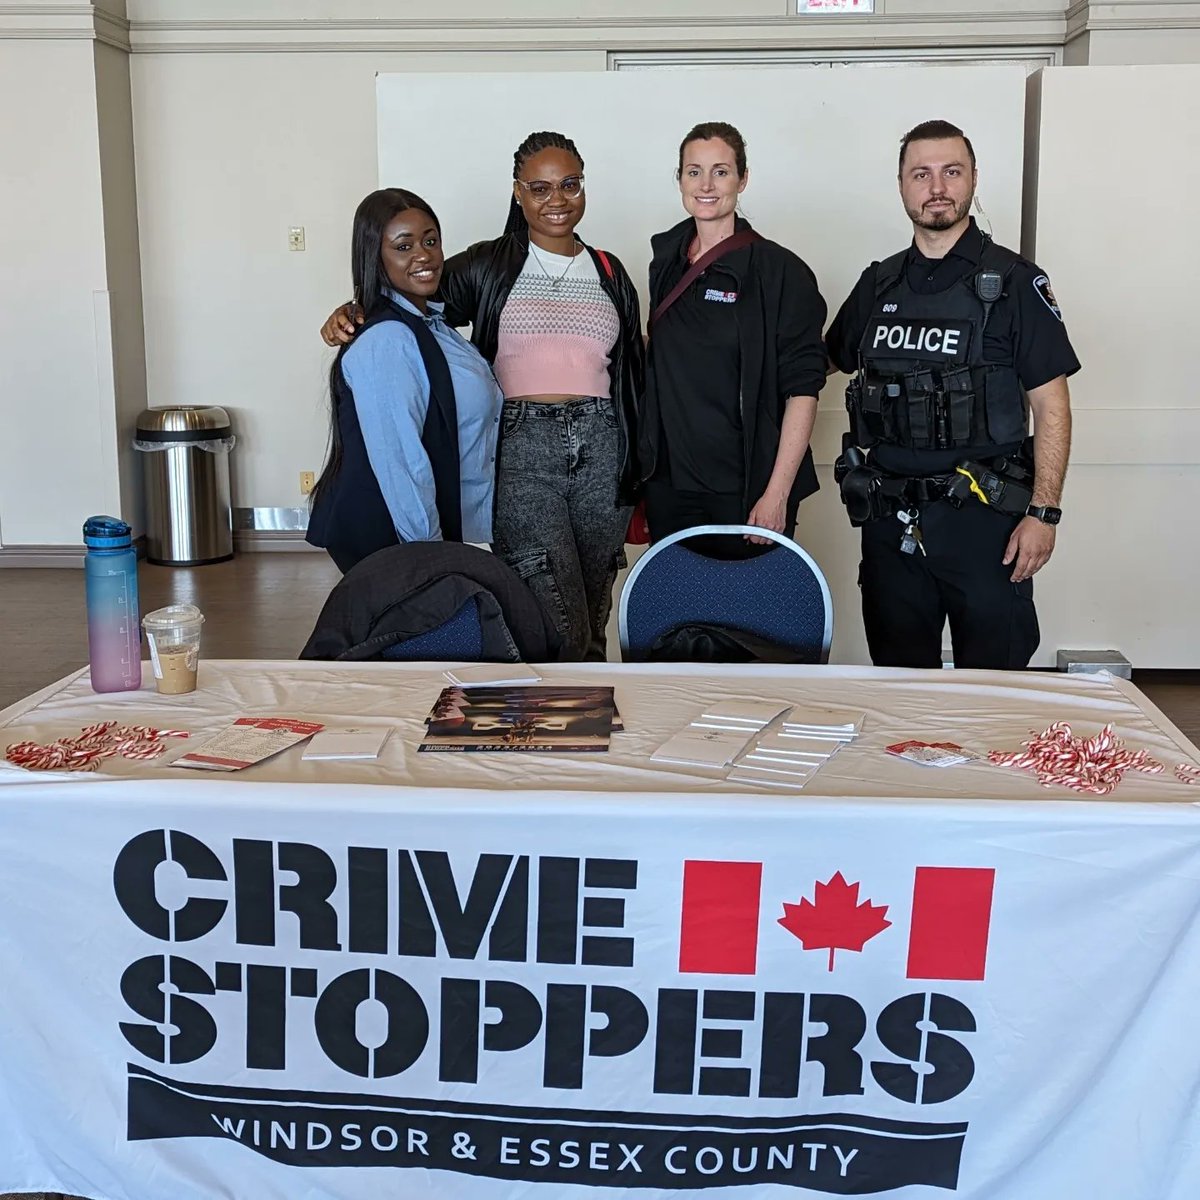 Windsor & Essex County Crime Stoppers at today's student orientation, educating students on the program and the volunteer opportunities! Windsor Police Service in attendance as well. It's always great meeting new students at St. Clair College! Thanks for having us! 👮🏼‍♂️👮🏽‍♀️